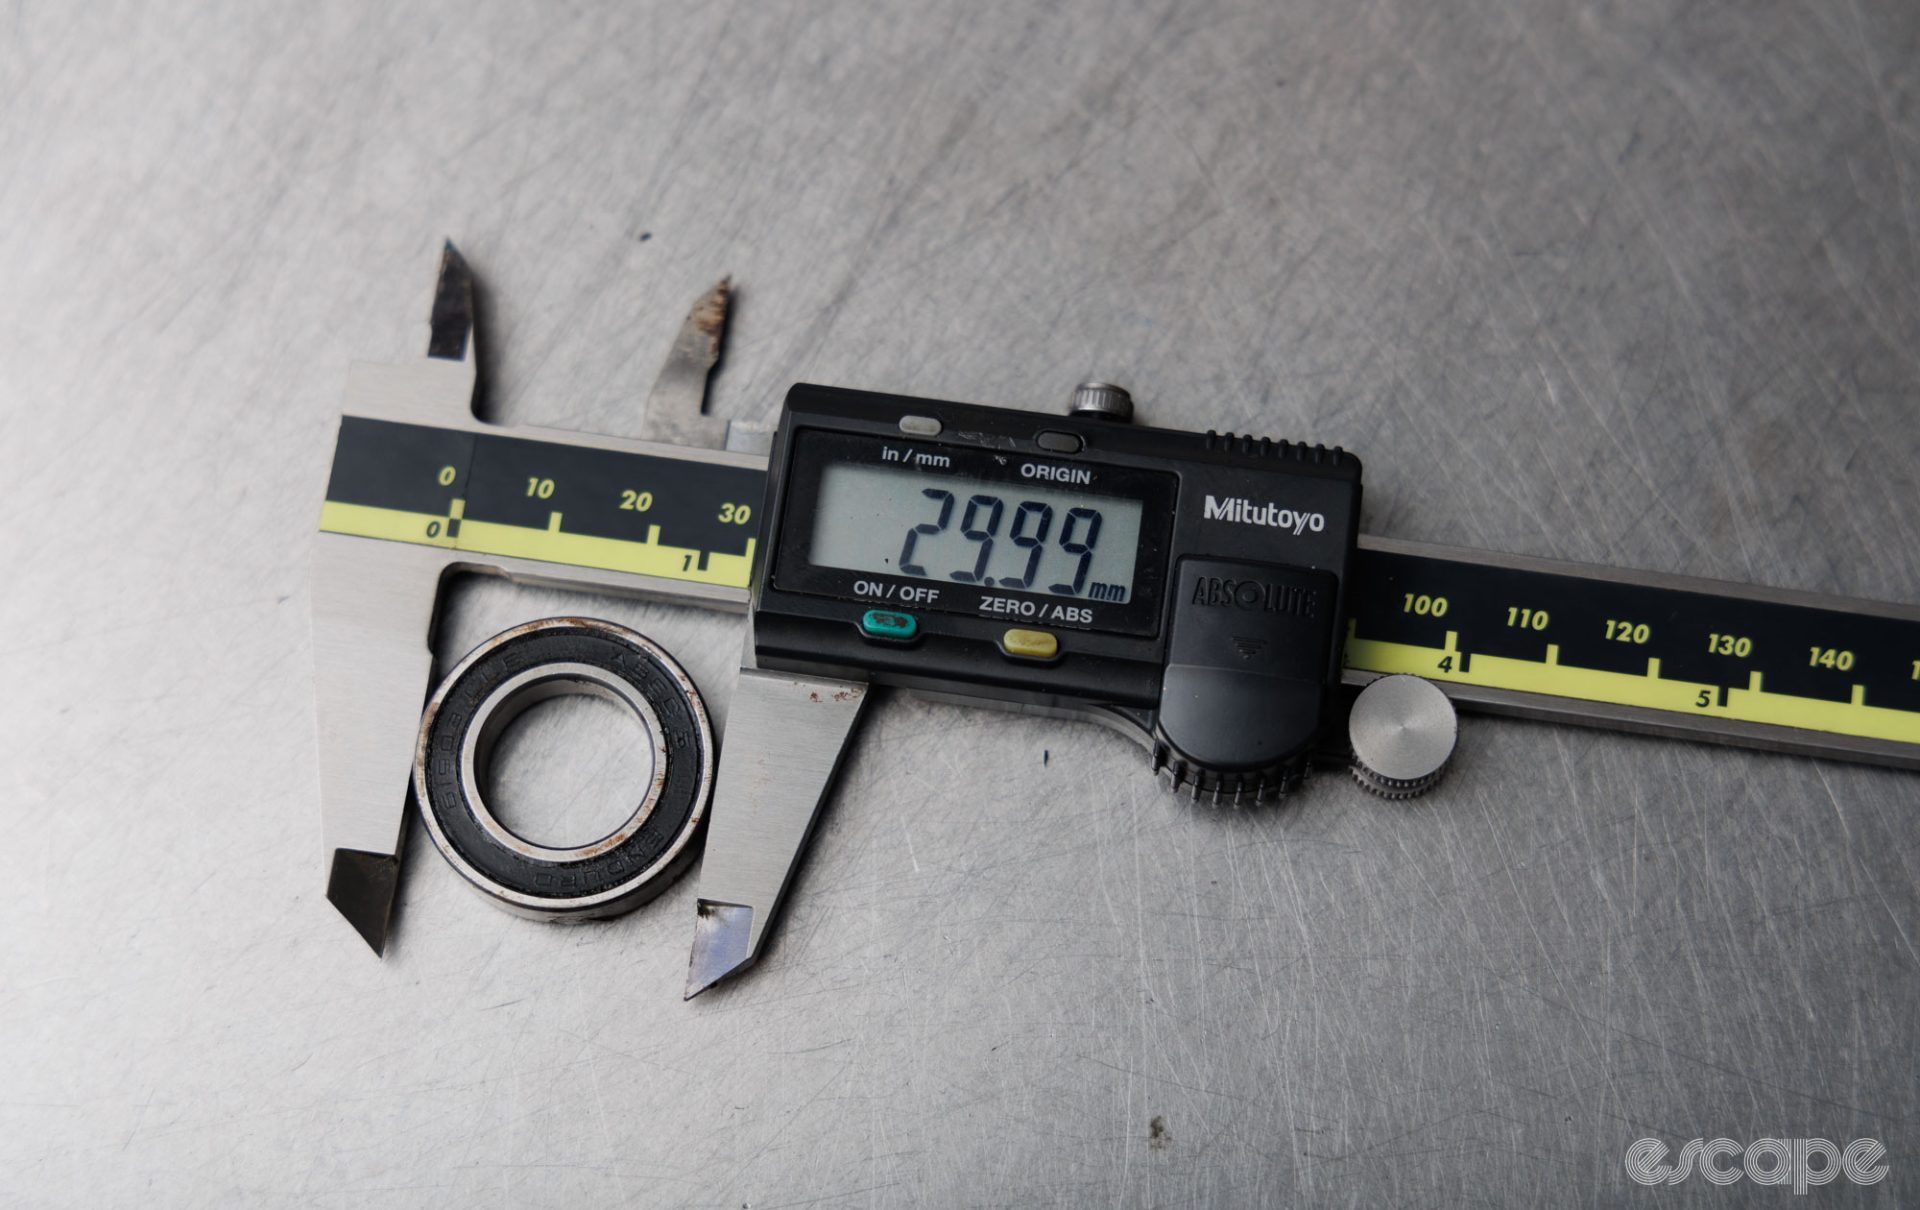 The outer diameter of a cartridge bearing is measured with digital calipers. The calipers read 29.99 mm. 